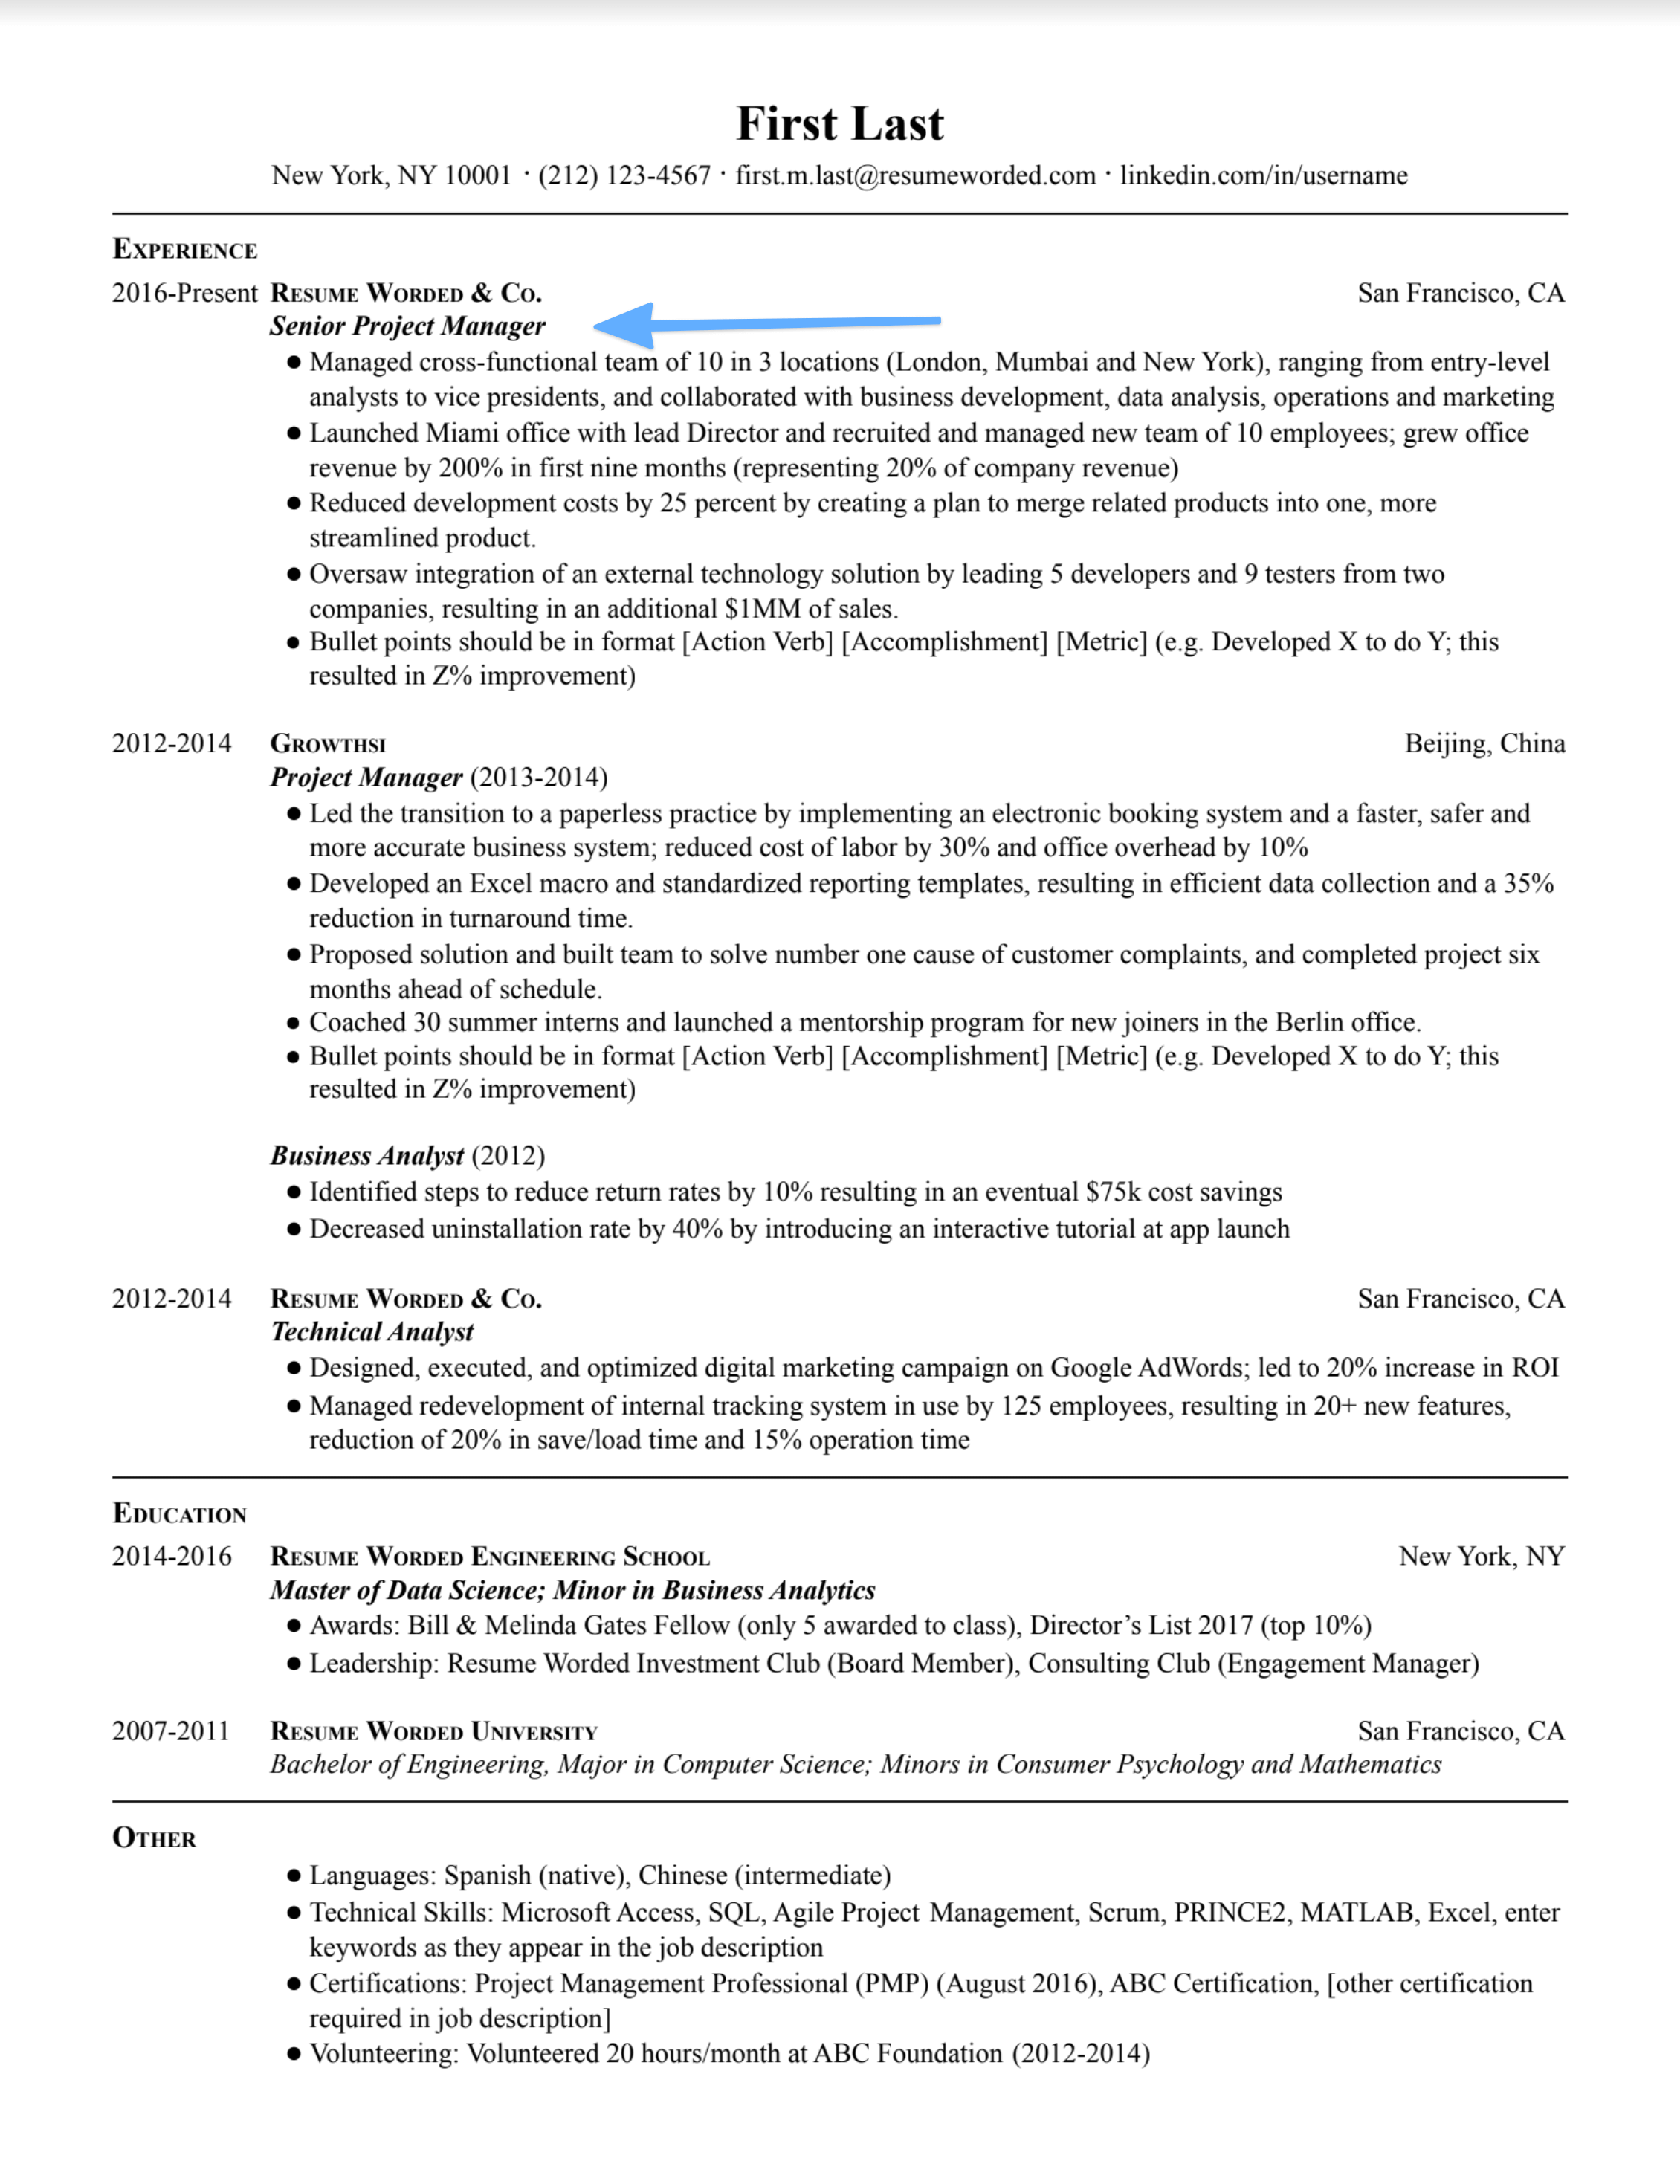 Senior project manager resume showing work experience, promotions, and accomplishments